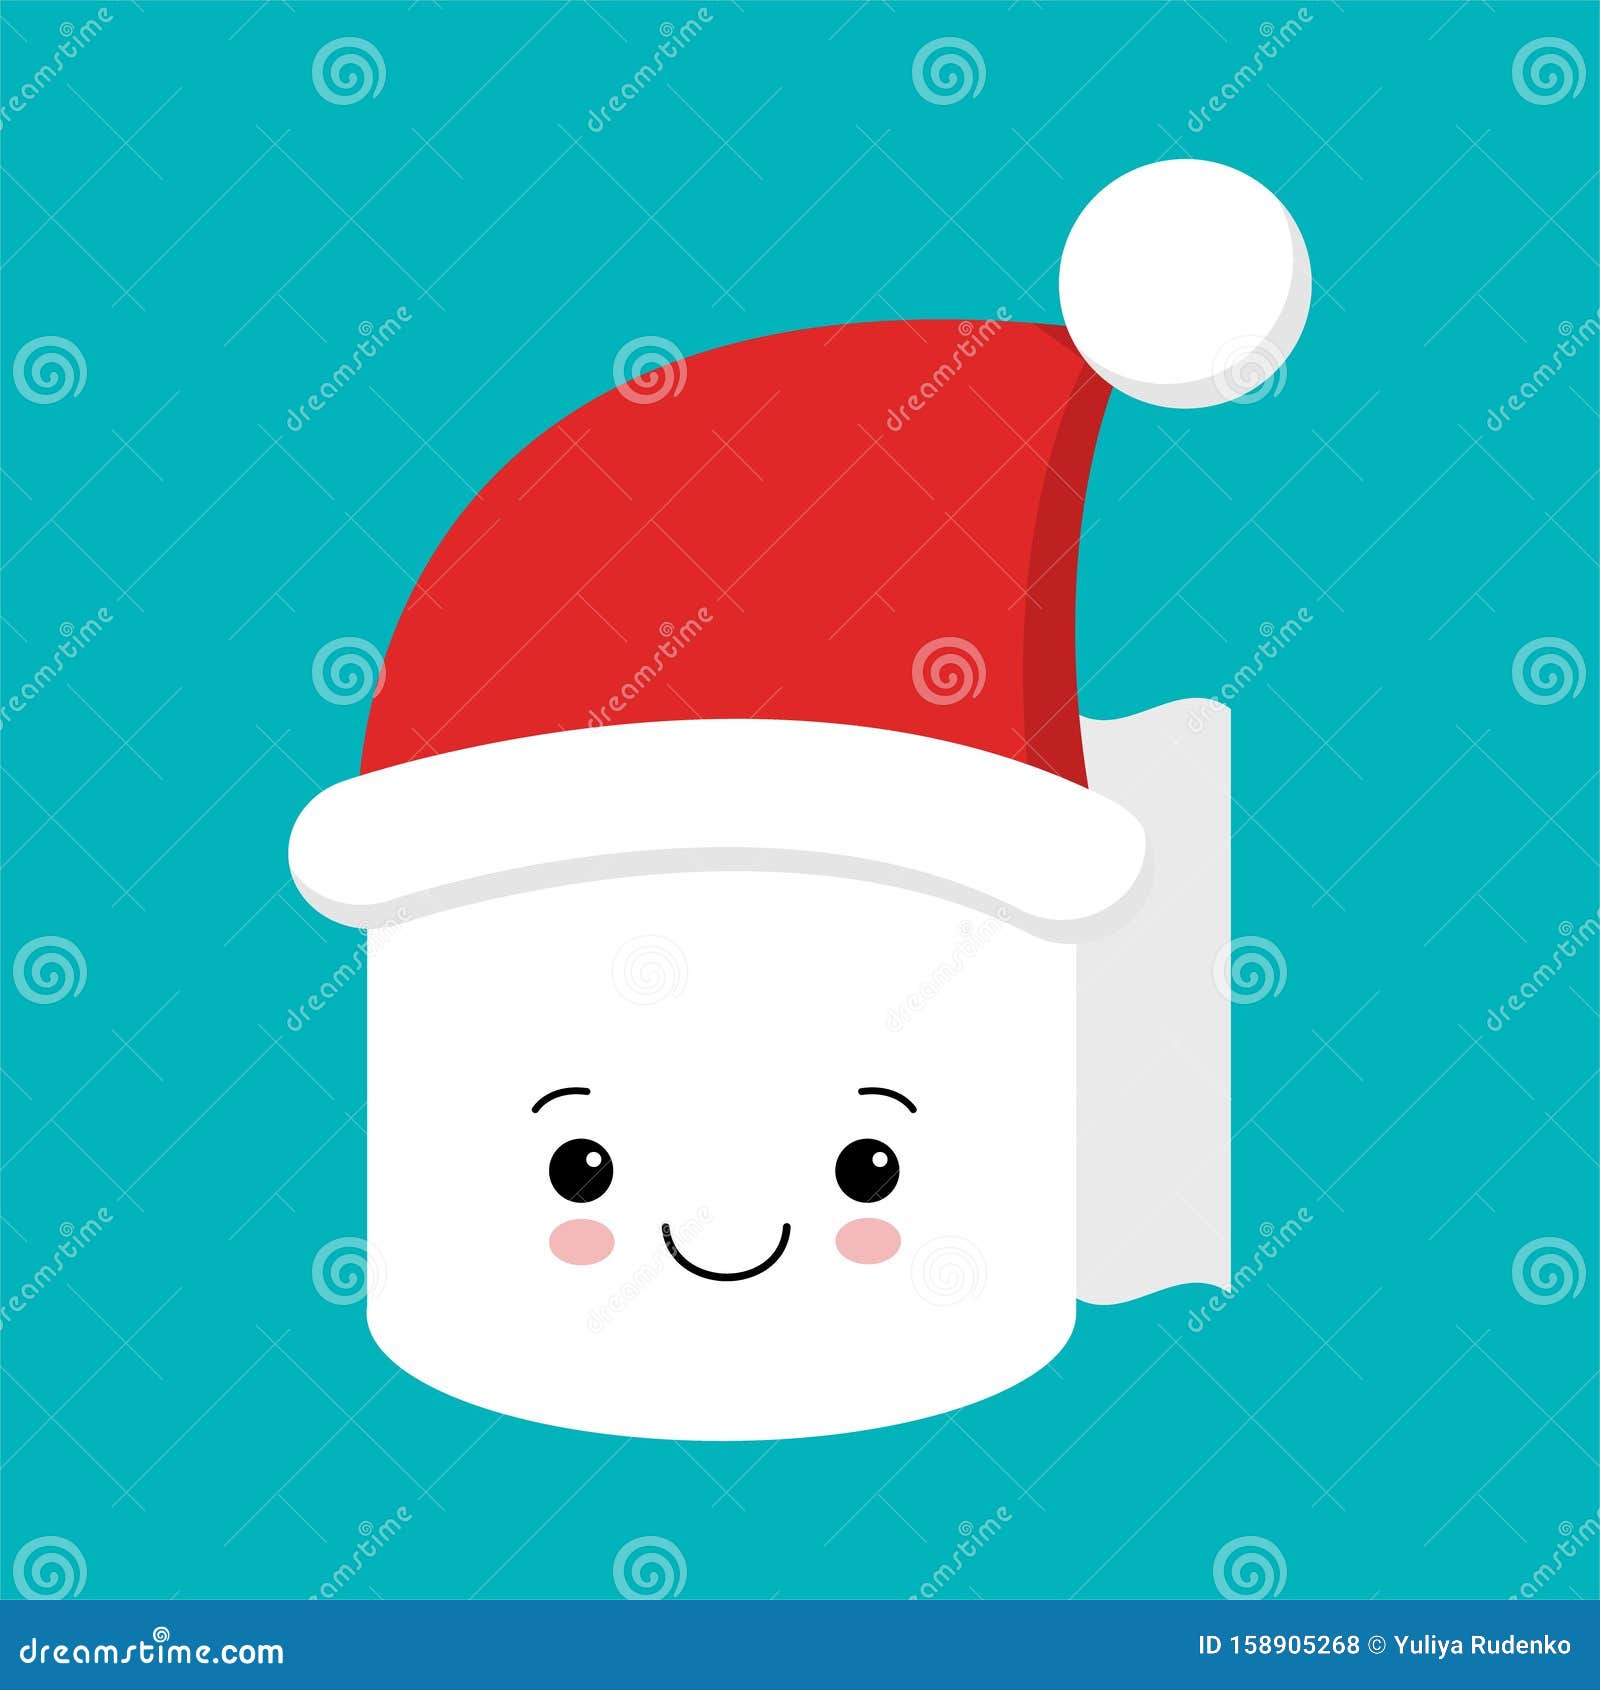 Cute and Funny Toilet Paper in Santa Hat Isolated on Blue Background.  Cartoon Character Stock Illustration - Illustration of perforated, gift:  158905268